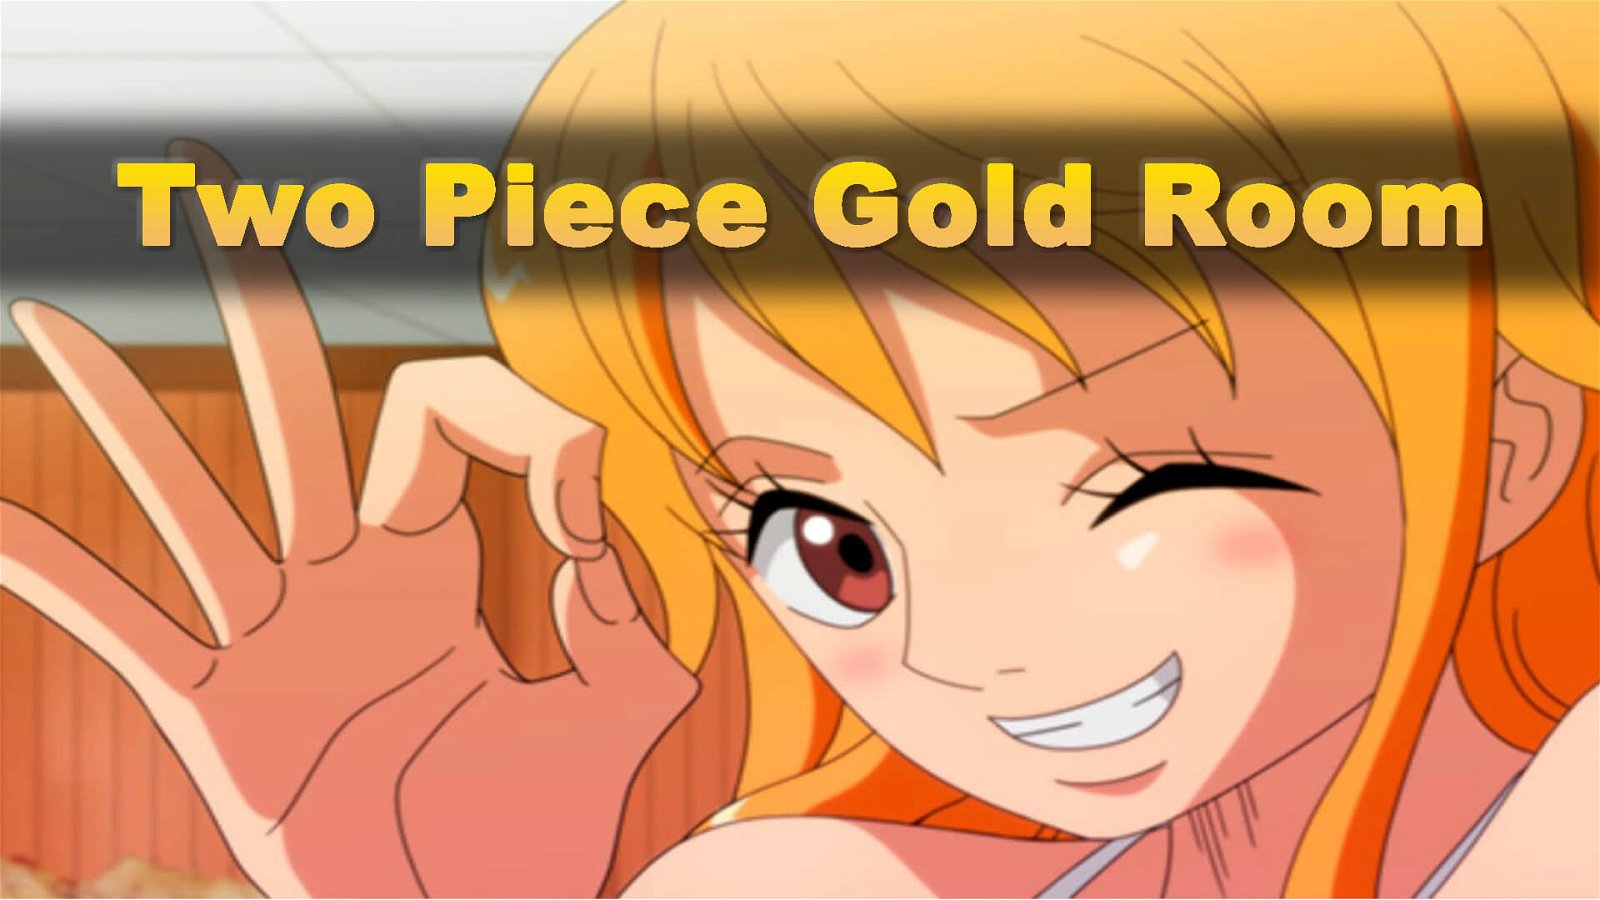 Unduh Two Piece Golden Room APK latest v1.1 untuk Android